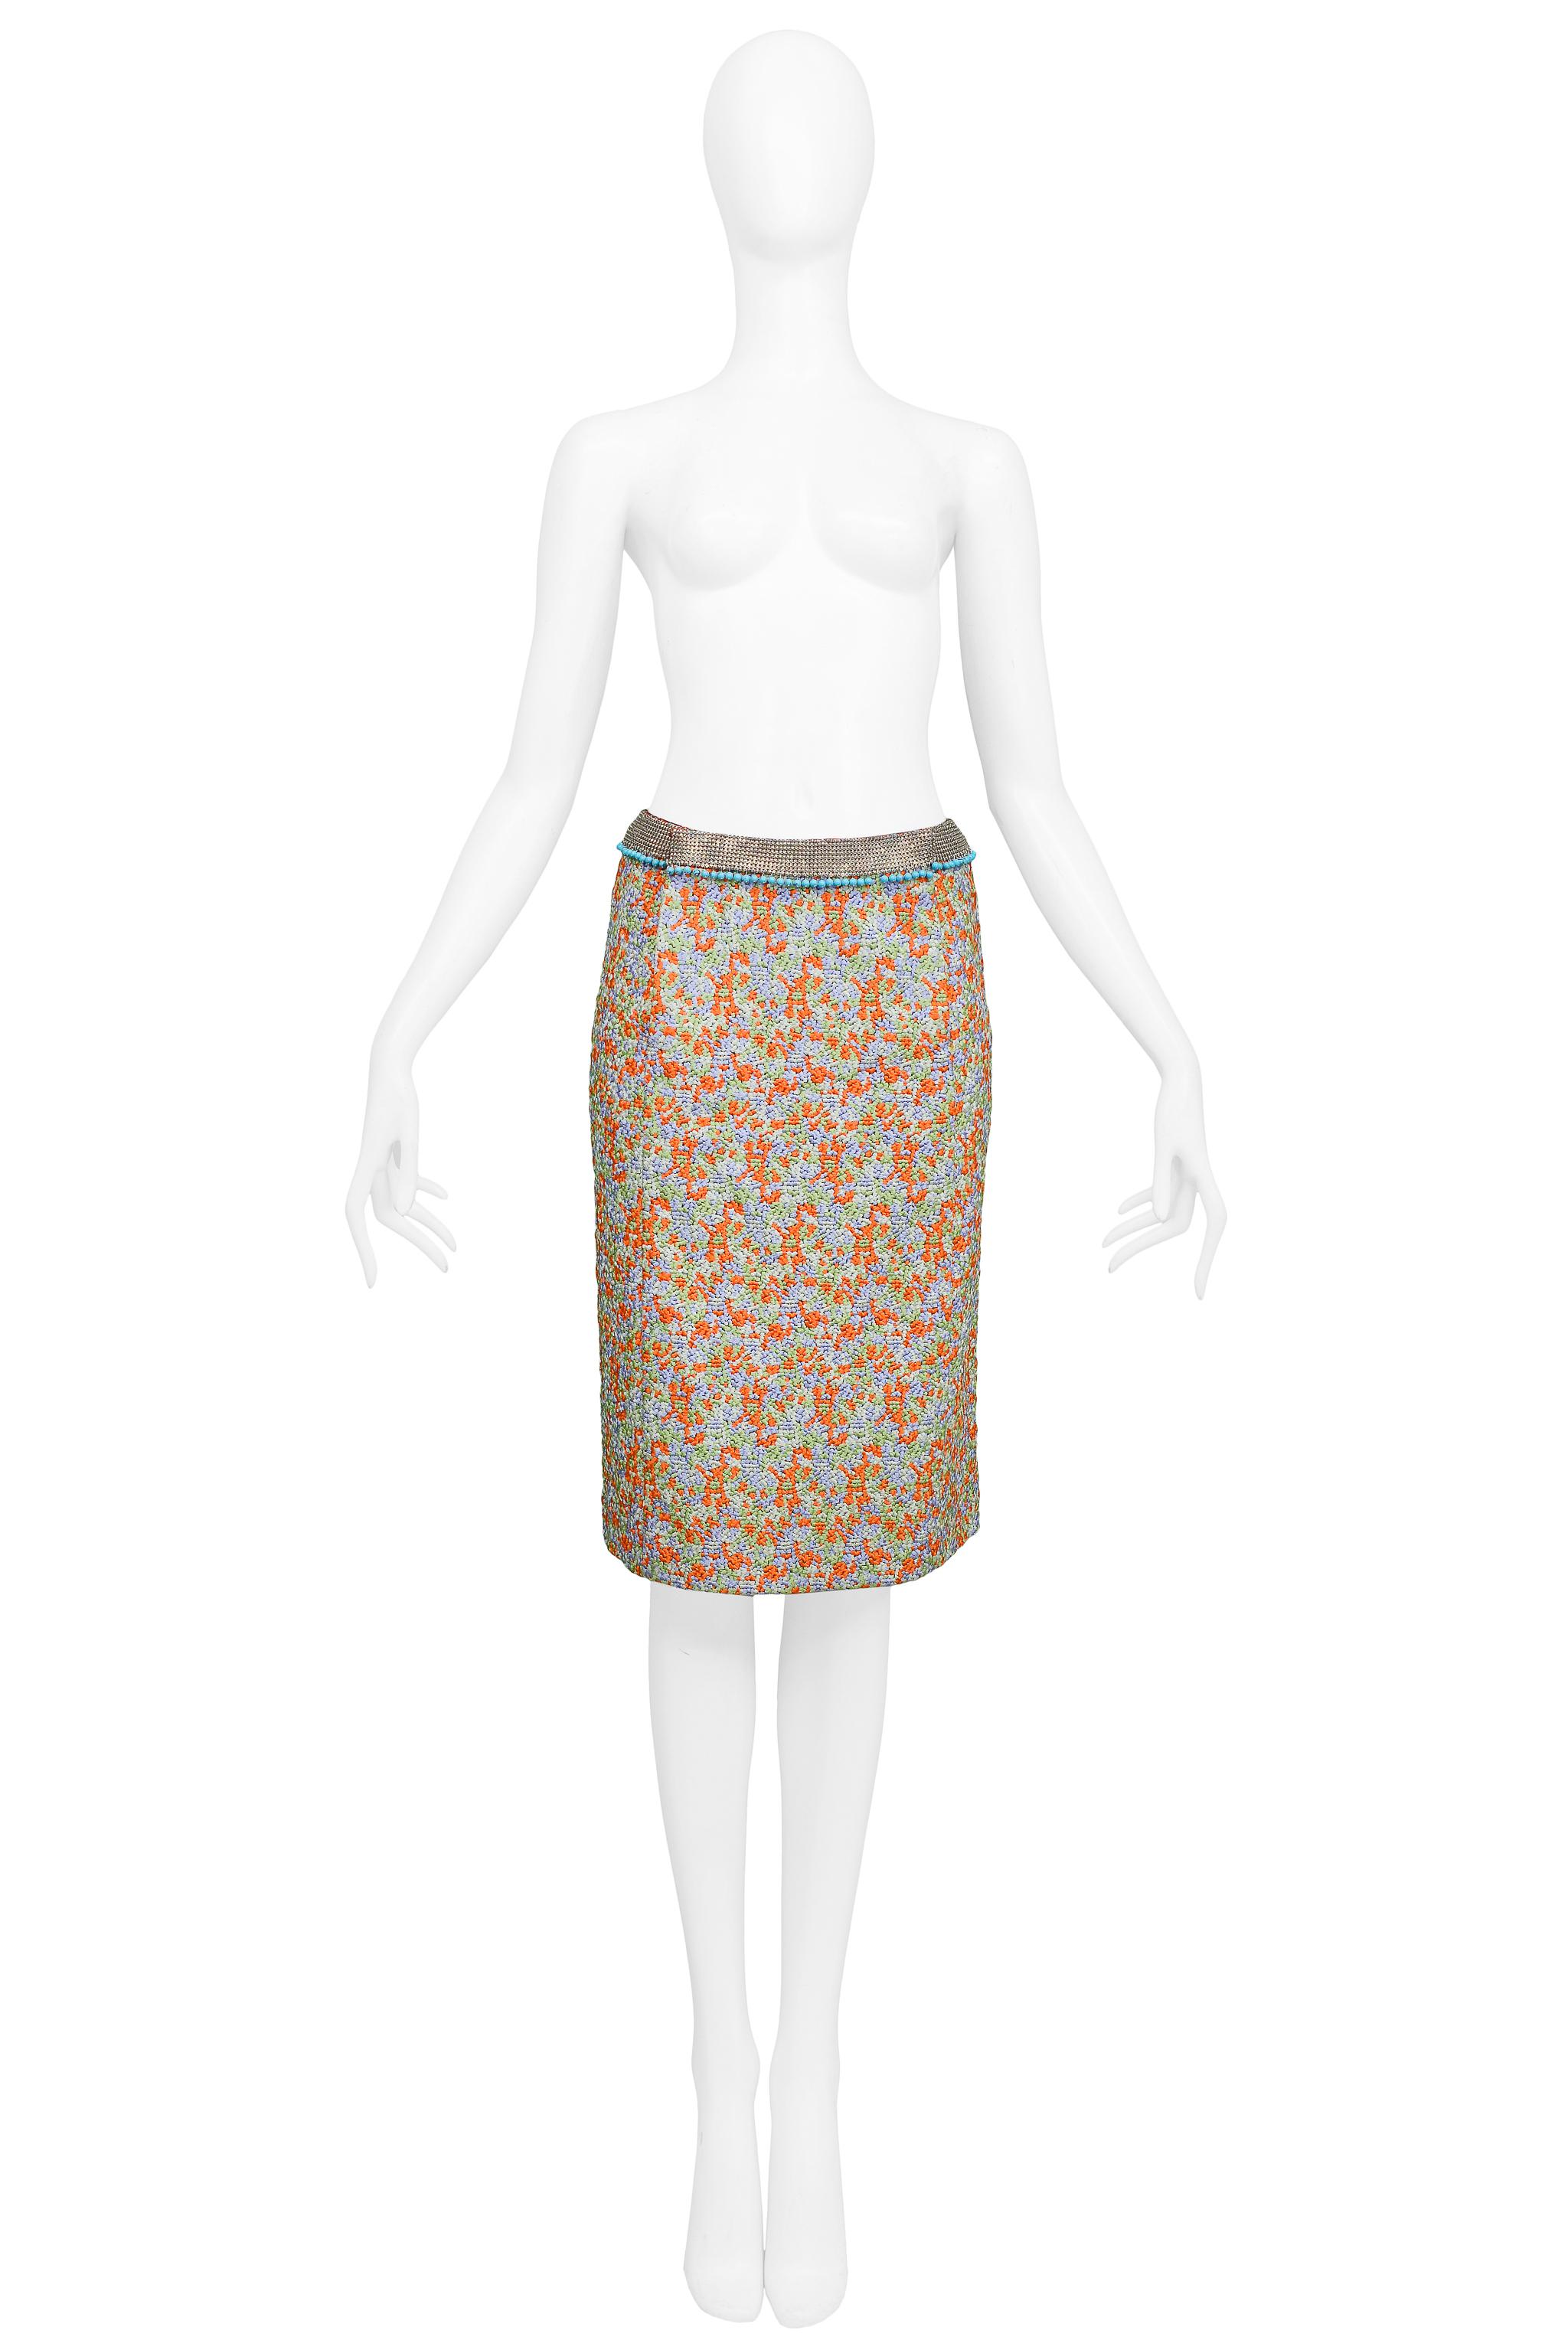 Resurrection Vintage is pleased to offer a rare vintage Gianni Versace multicolor skirt featuring a metal mesh waistband with blue beads. 

Versace 
Size 38
Woven Fabric with Metal Mesh
1999 Collection
Excellent Vintage Condition
Authenticity